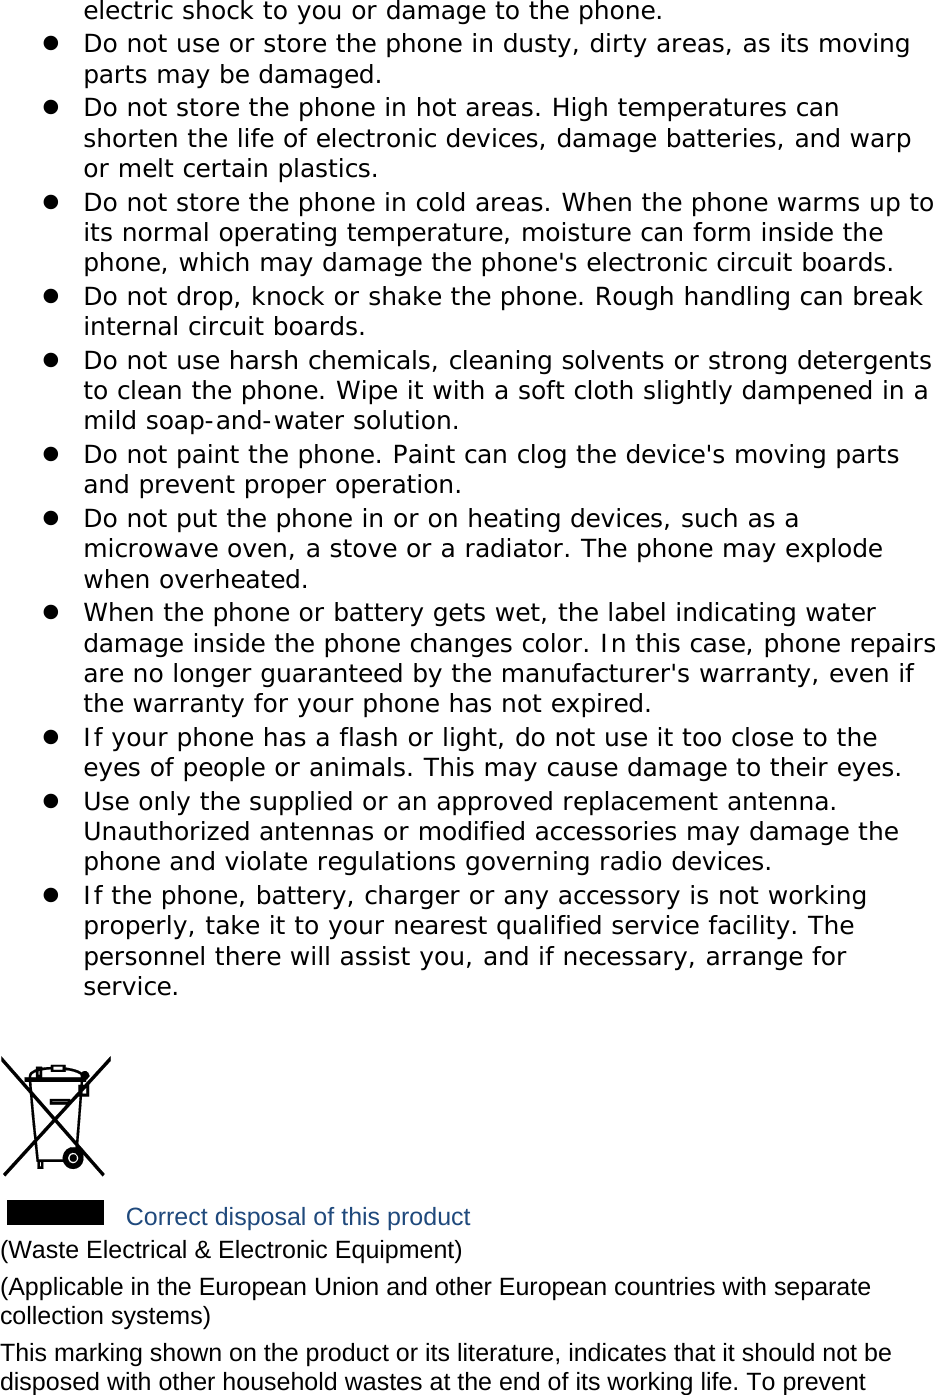 electric shock to you or damage to the phone.  Do not use or store the phone in dusty, dirty areas, as its moving parts may be damaged.  Do not store the phone in hot areas. High temperatures can shorten the life of electronic devices, damage batteries, and warp or melt certain plastics.  Do not store the phone in cold areas. When the phone warms up to its normal operating temperature, moisture can form inside the phone, which may damage the phone&apos;s electronic circuit boards.  Do not drop, knock or shake the phone. Rough handling can break internal circuit boards.  Do not use harsh chemicals, cleaning solvents or strong detergents to clean the phone. Wipe it with a soft cloth slightly dampened in a mild soap-and-water solution.  Do not paint the phone. Paint can clog the device&apos;s moving parts and prevent proper operation.  Do not put the phone in or on heating devices, such as a microwave oven, a stove or a radiator. The phone may explode when overheated.  When the phone or battery gets wet, the label indicating water damage inside the phone changes color. In this case, phone repairs are no longer guaranteed by the manufacturer&apos;s warranty, even if the warranty for your phone has not expired.   If your phone has a flash or light, do not use it too close to the eyes of people or animals. This may cause damage to their eyes.  Use only the supplied or an approved replacement antenna. Unauthorized antennas or modified accessories may damage the phone and violate regulations governing radio devices.  If the phone, battery, charger or any accessory is not working properly, take it to your nearest qualified service facility. The personnel there will assist you, and if necessary, arrange for service.   Correct disposal of this product (Waste Electrical &amp; Electronic Equipment) (Applicable in the European Union and other European countries with separate collection systems) This marking shown on the product or its literature, indicates that it should not be disposed with other household wastes at the end of its working life. To prevent 